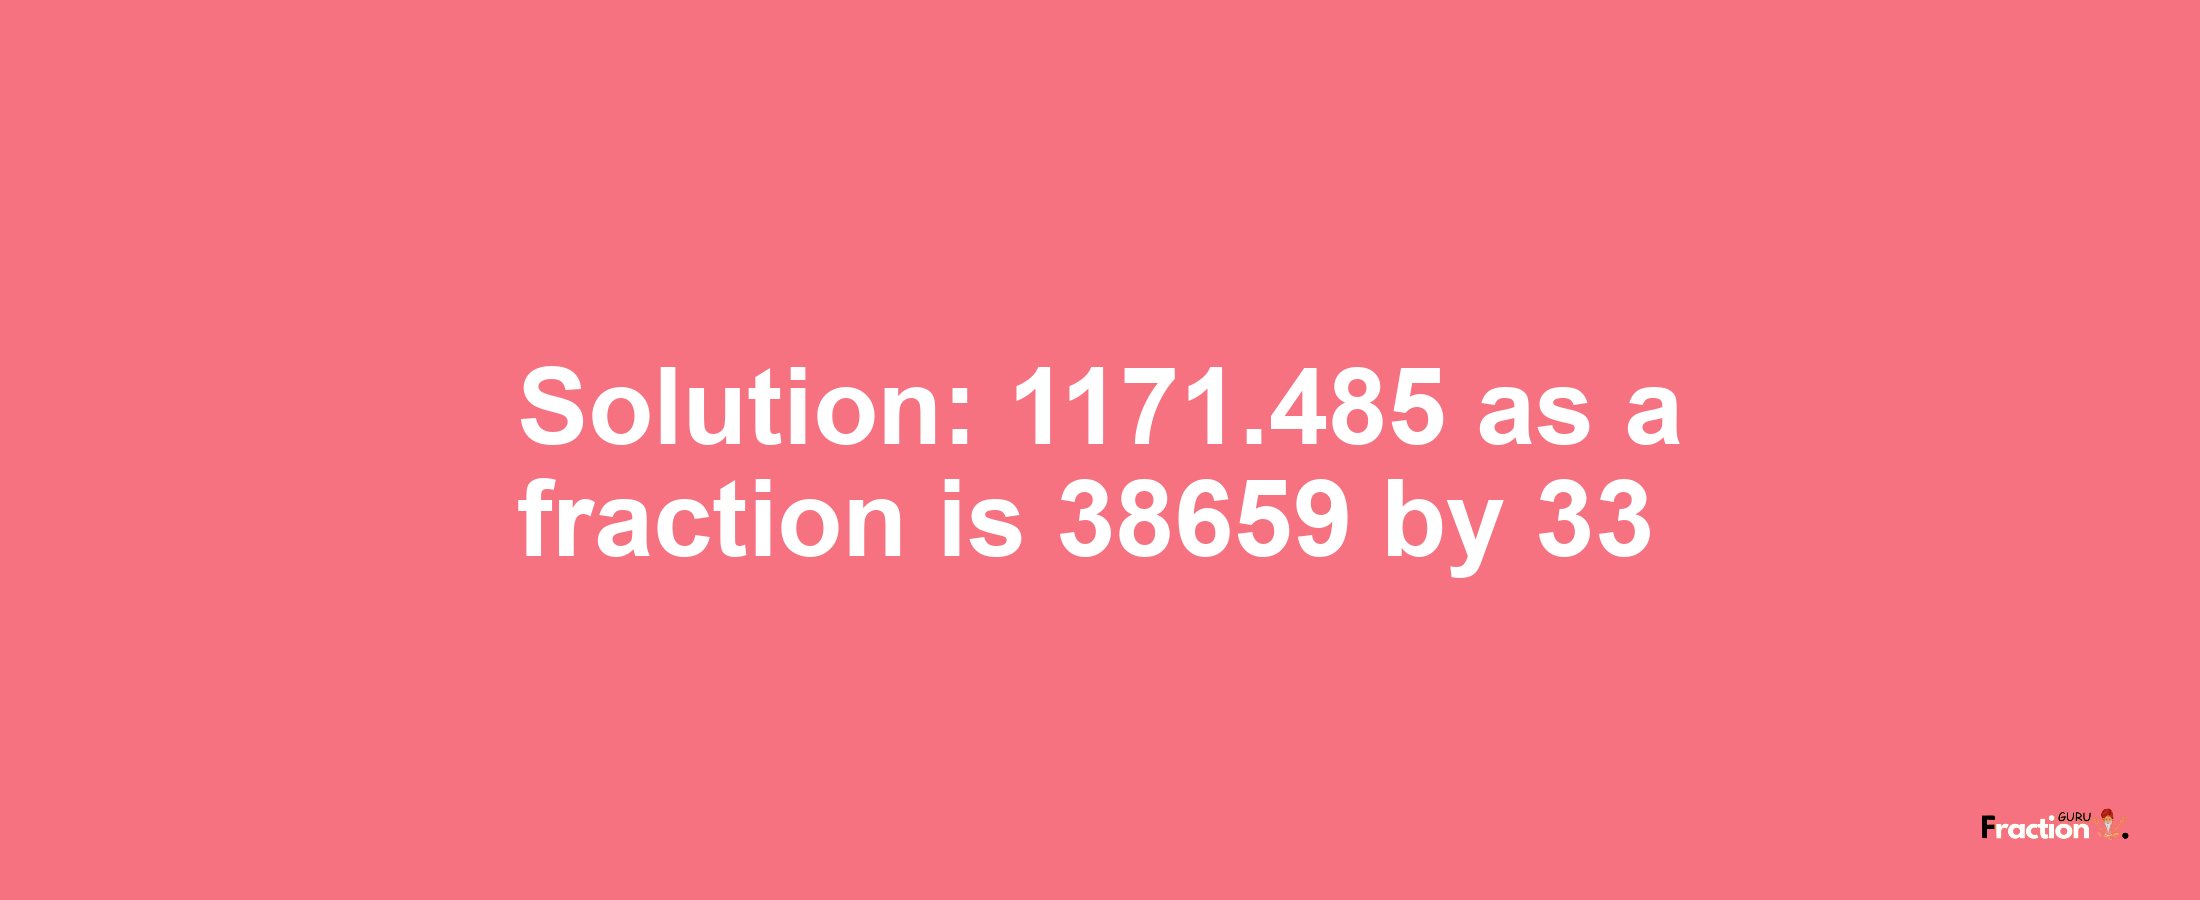 Solution:1171.485 as a fraction is 38659/33